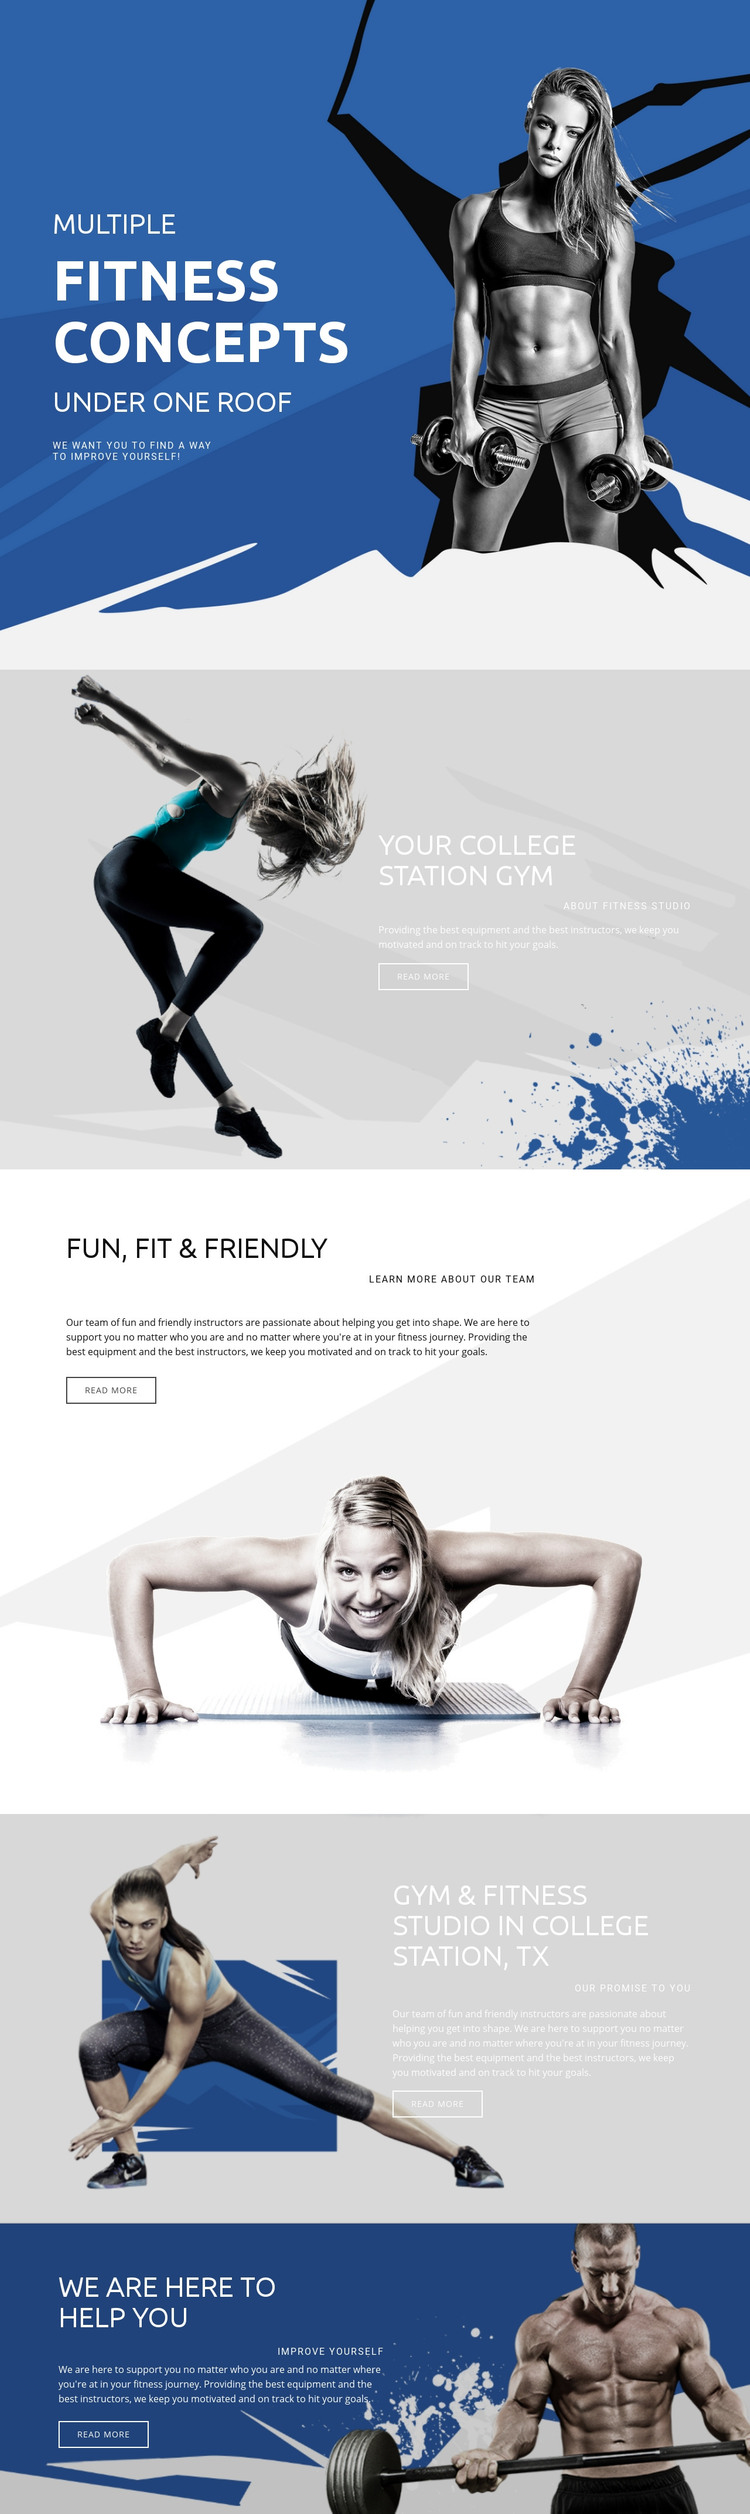 Best fitness and sports Homepage Design